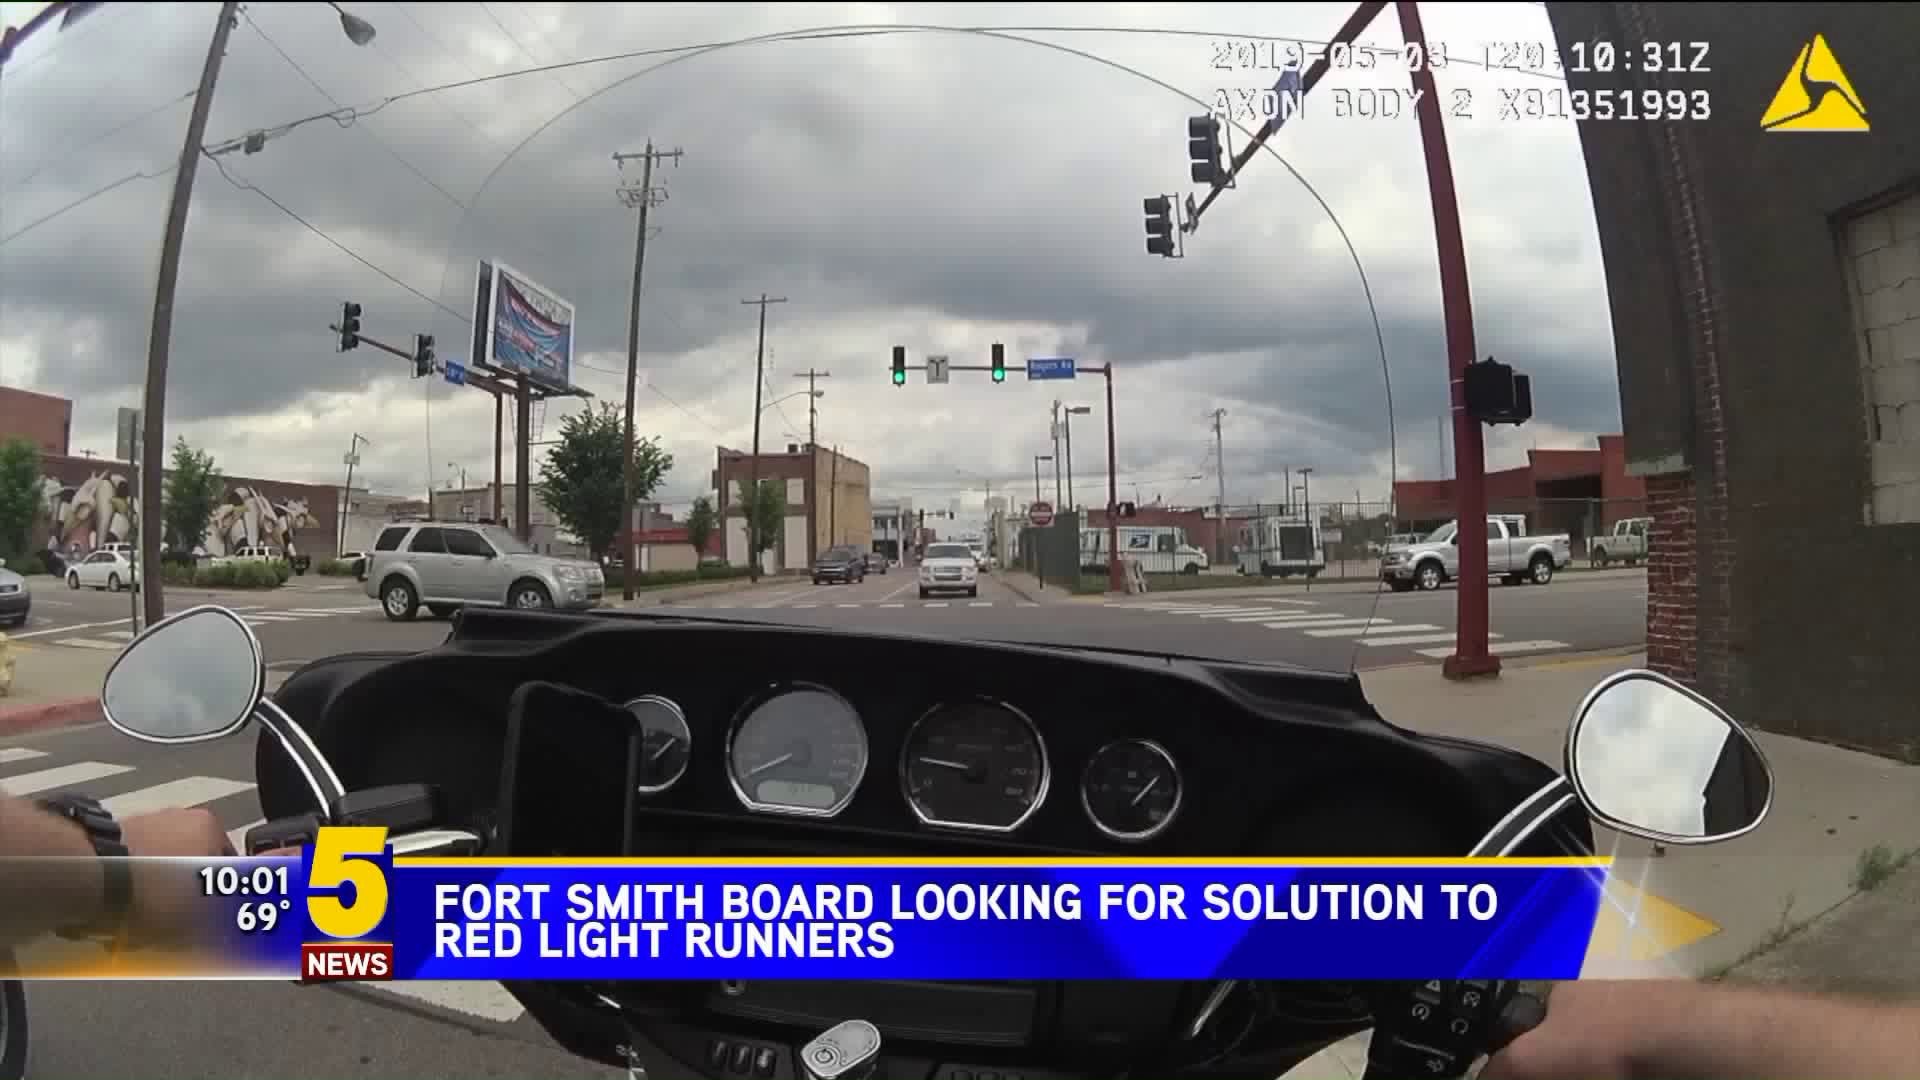 Fort Smith Board Looking for Solution to Red Light Runners